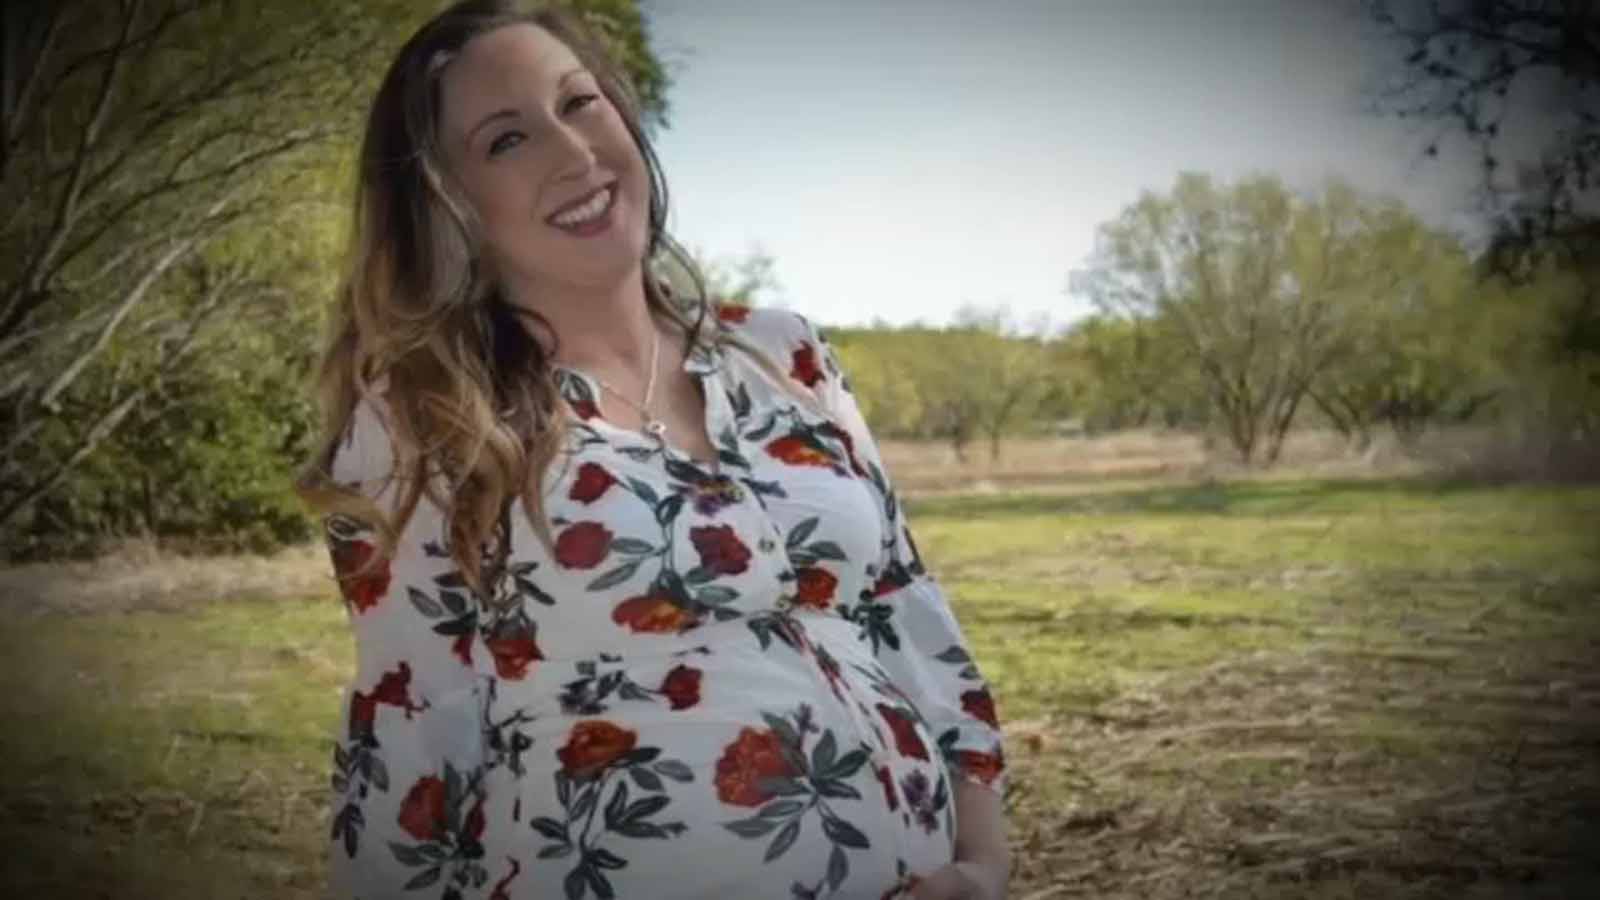 Magen Fieramusca was jealous of her best friend's new baby. So she decided to just take the newborn all for herself, to cover up her own fake pregnancy.